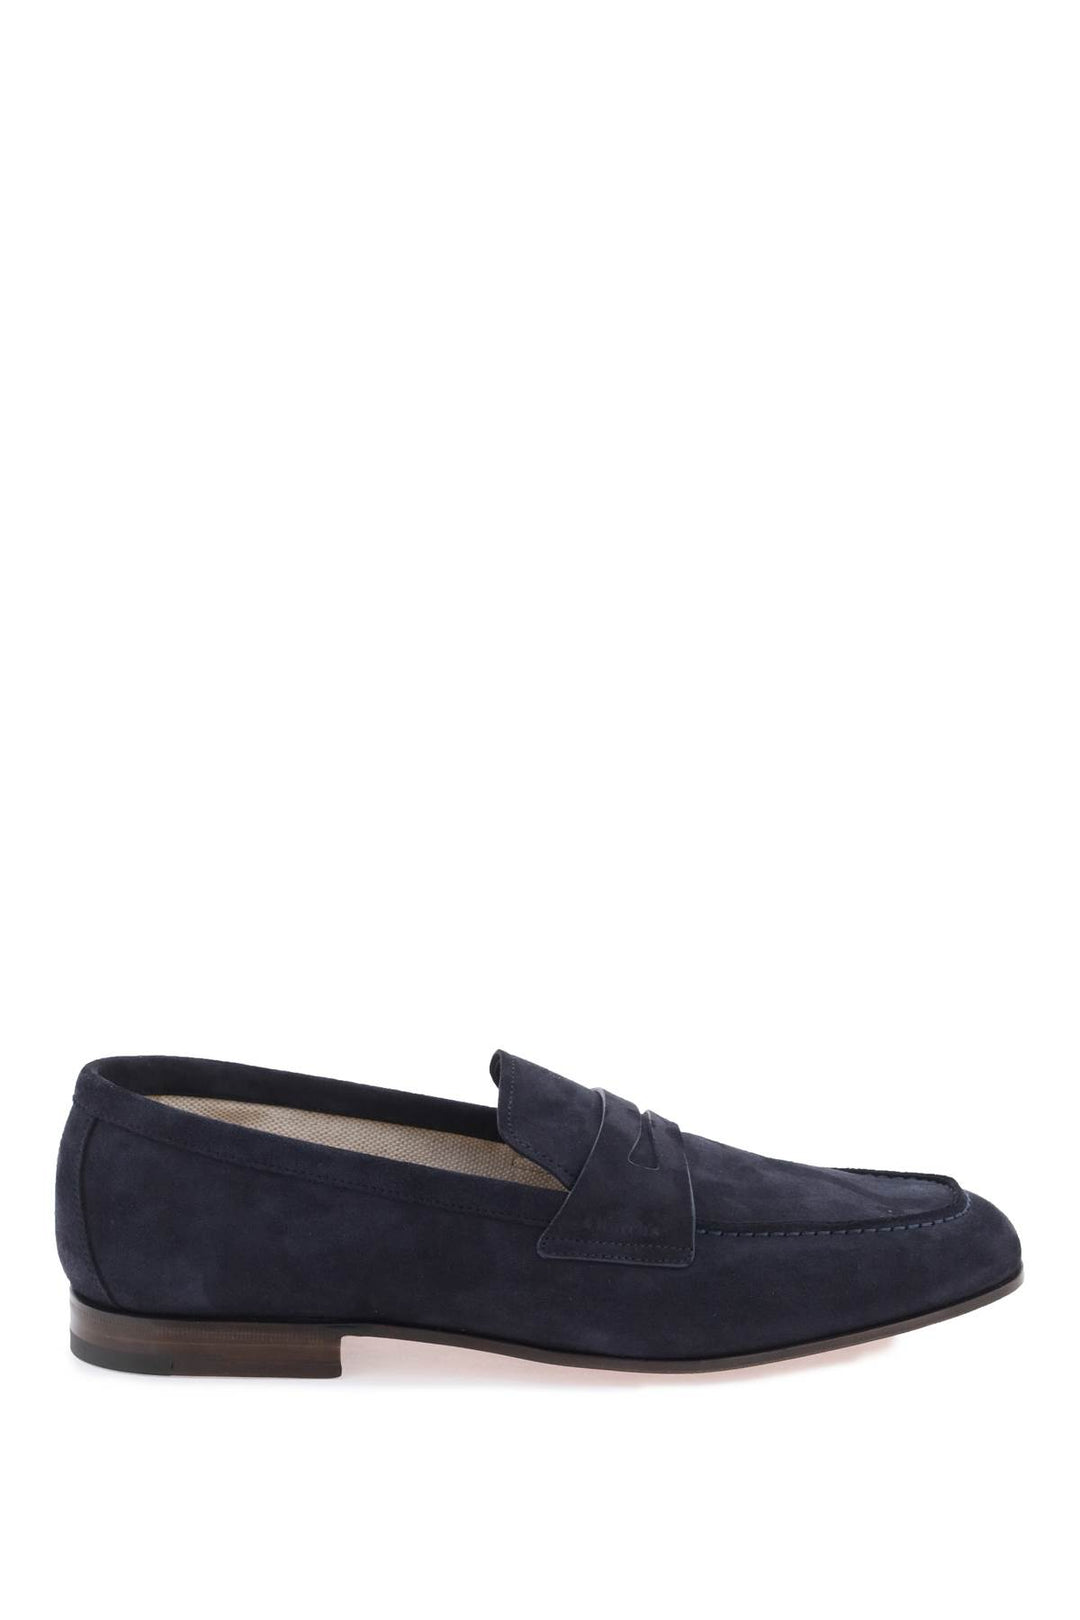 Church's Heswall 2 Loafers   Blu